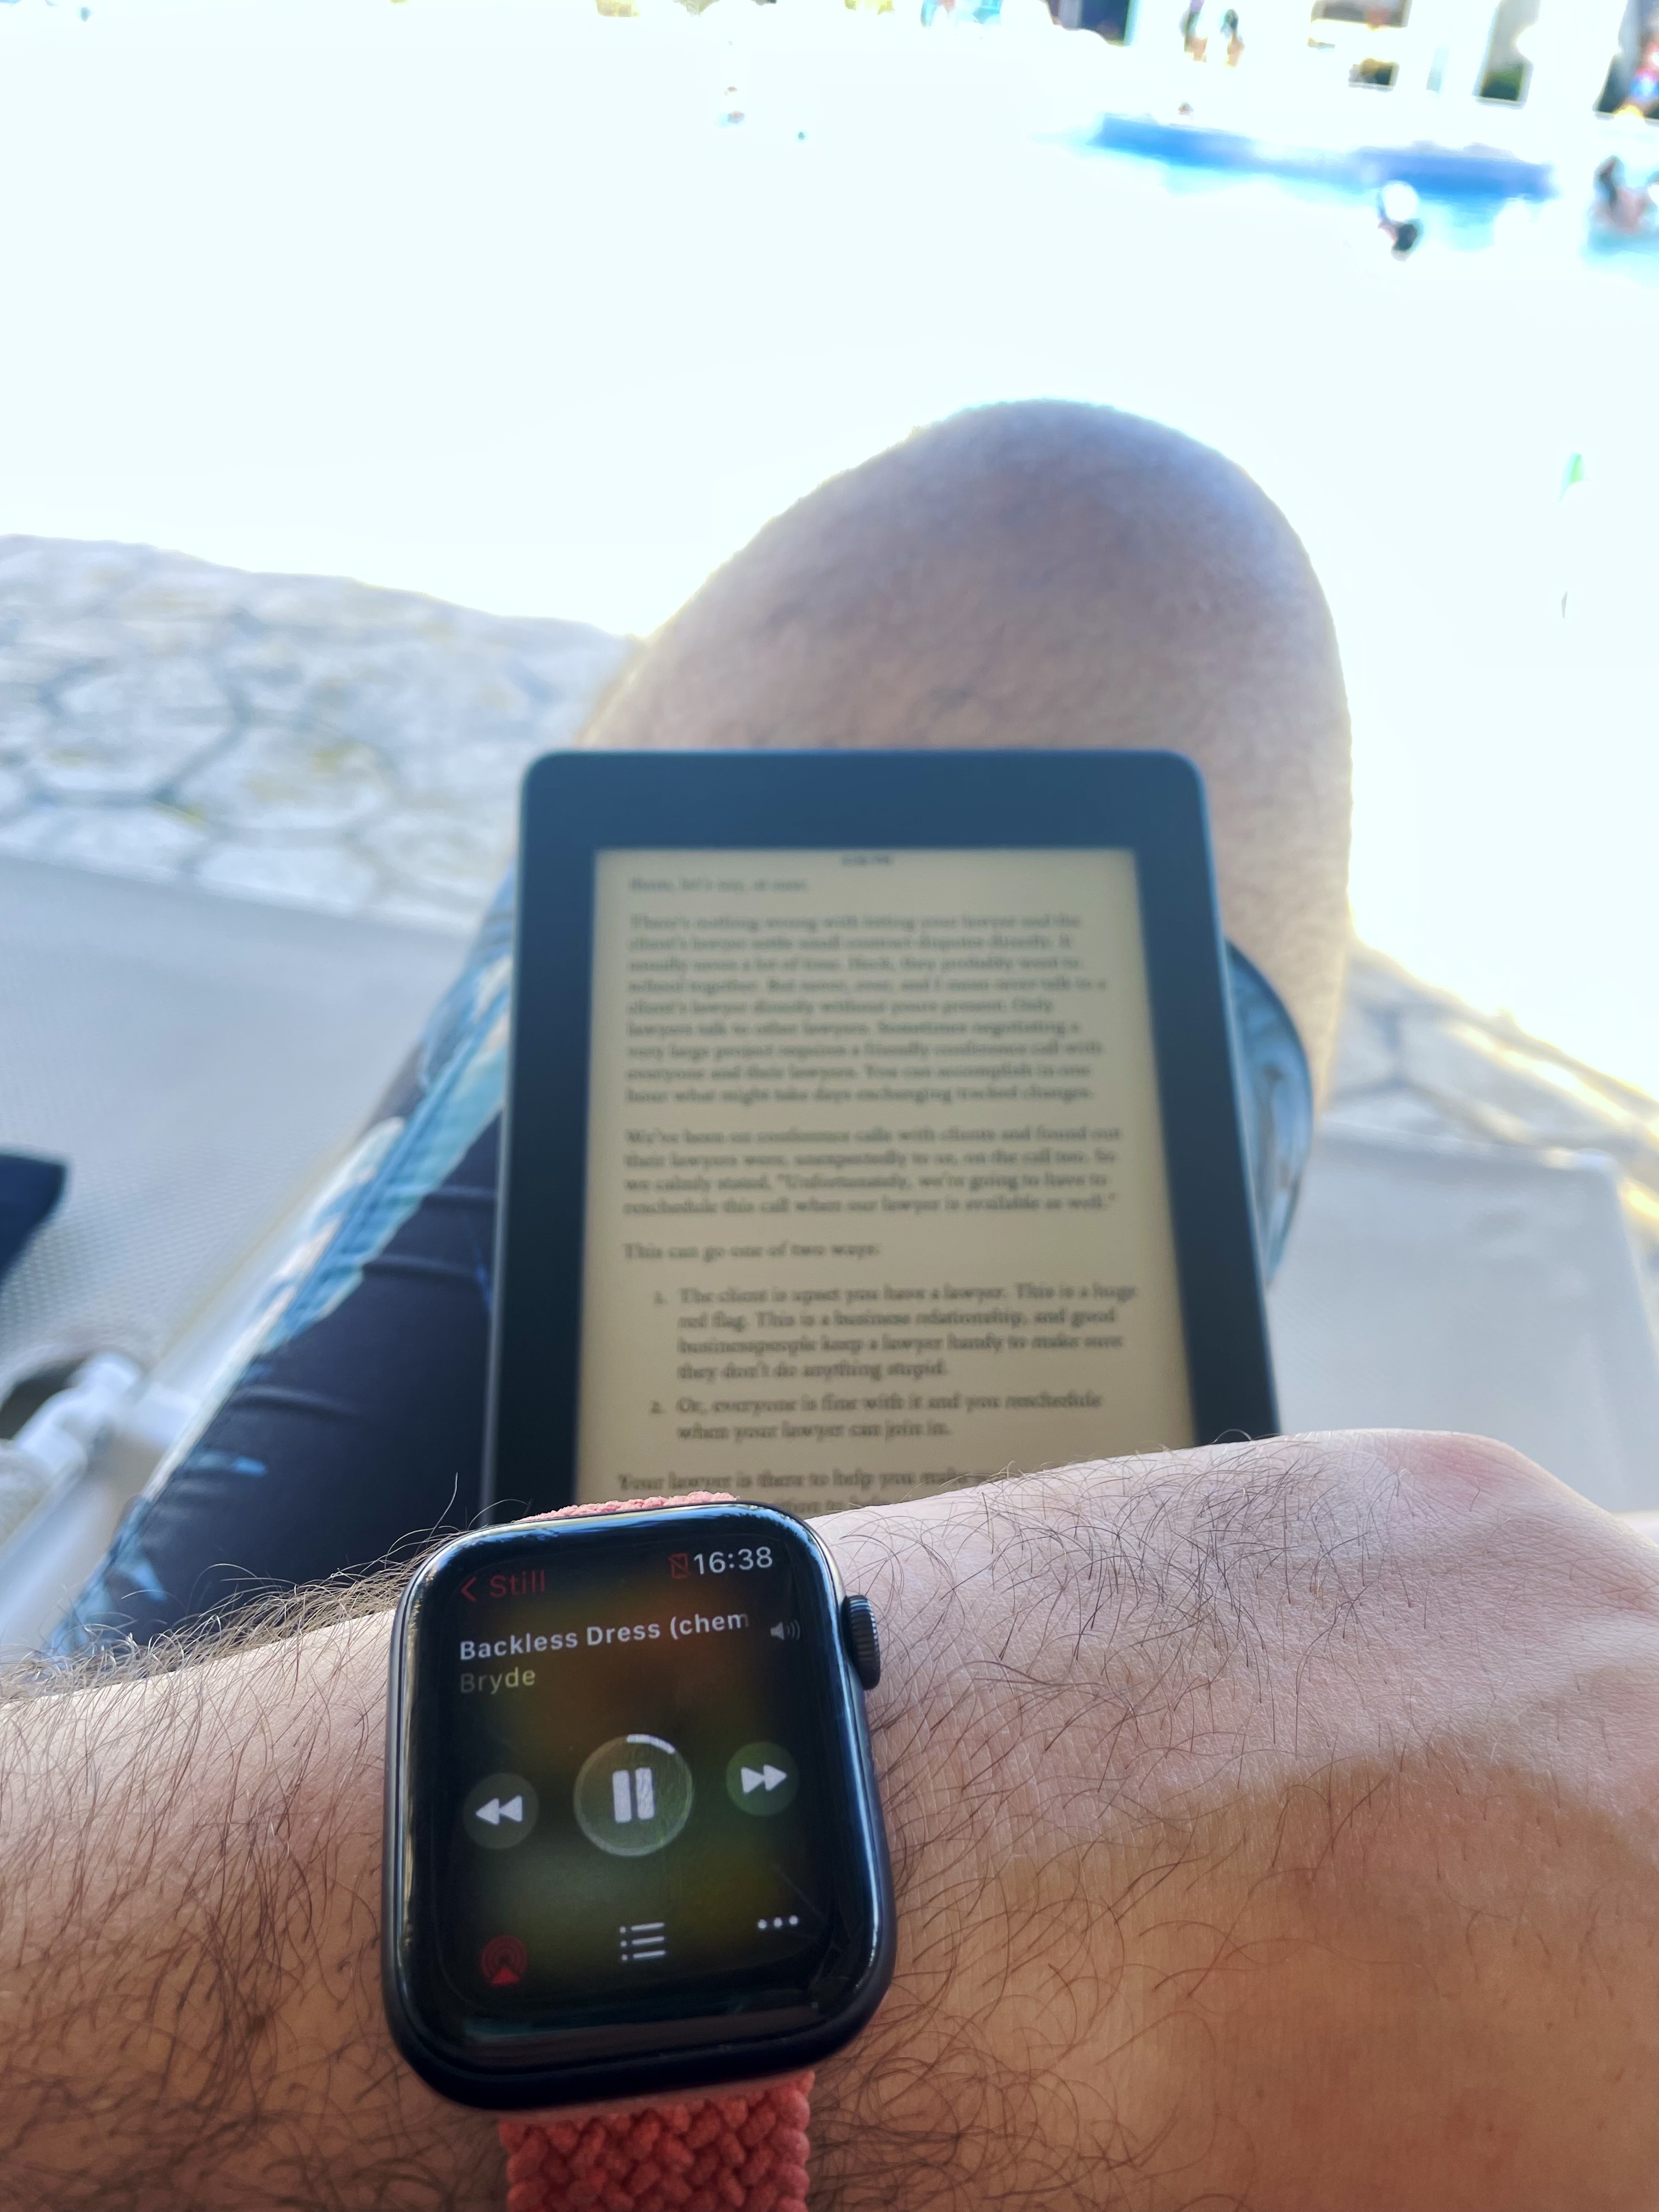 Sitting on a sunbed looking over to the pool, Kindle on my lap, arm turned over to show Apple Watch now playing Backless Dress by Bryde.